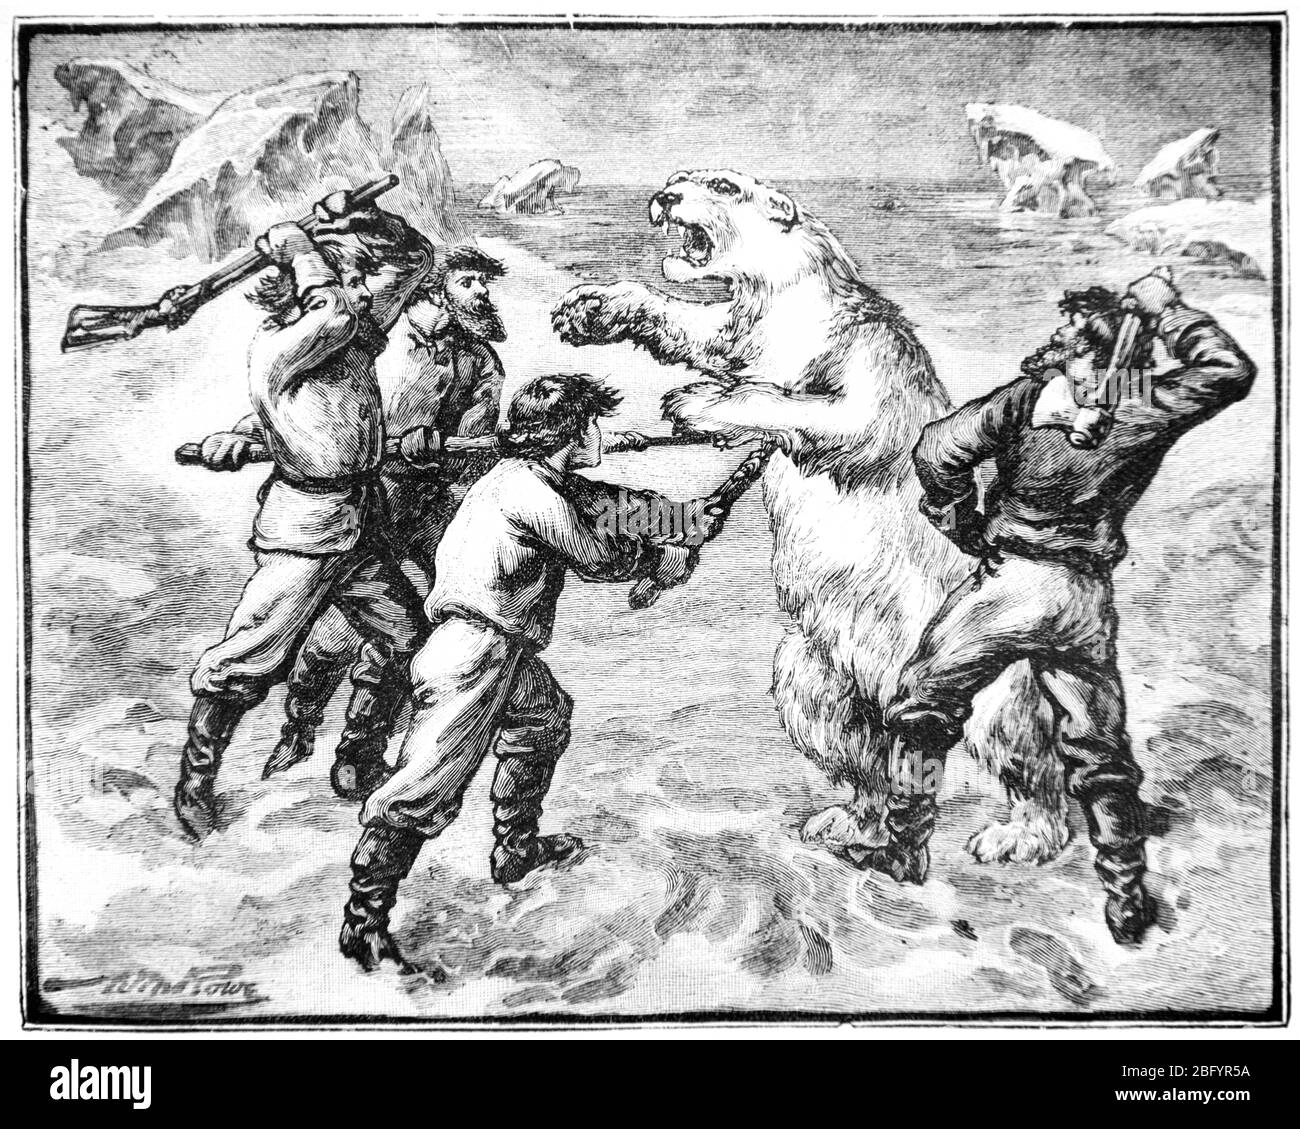 Polar Bear, Ursus maritimus, Attacking Men or Humans in the Arctic. Vintage or Old Illustration or Engraving 1890 Stock Photo